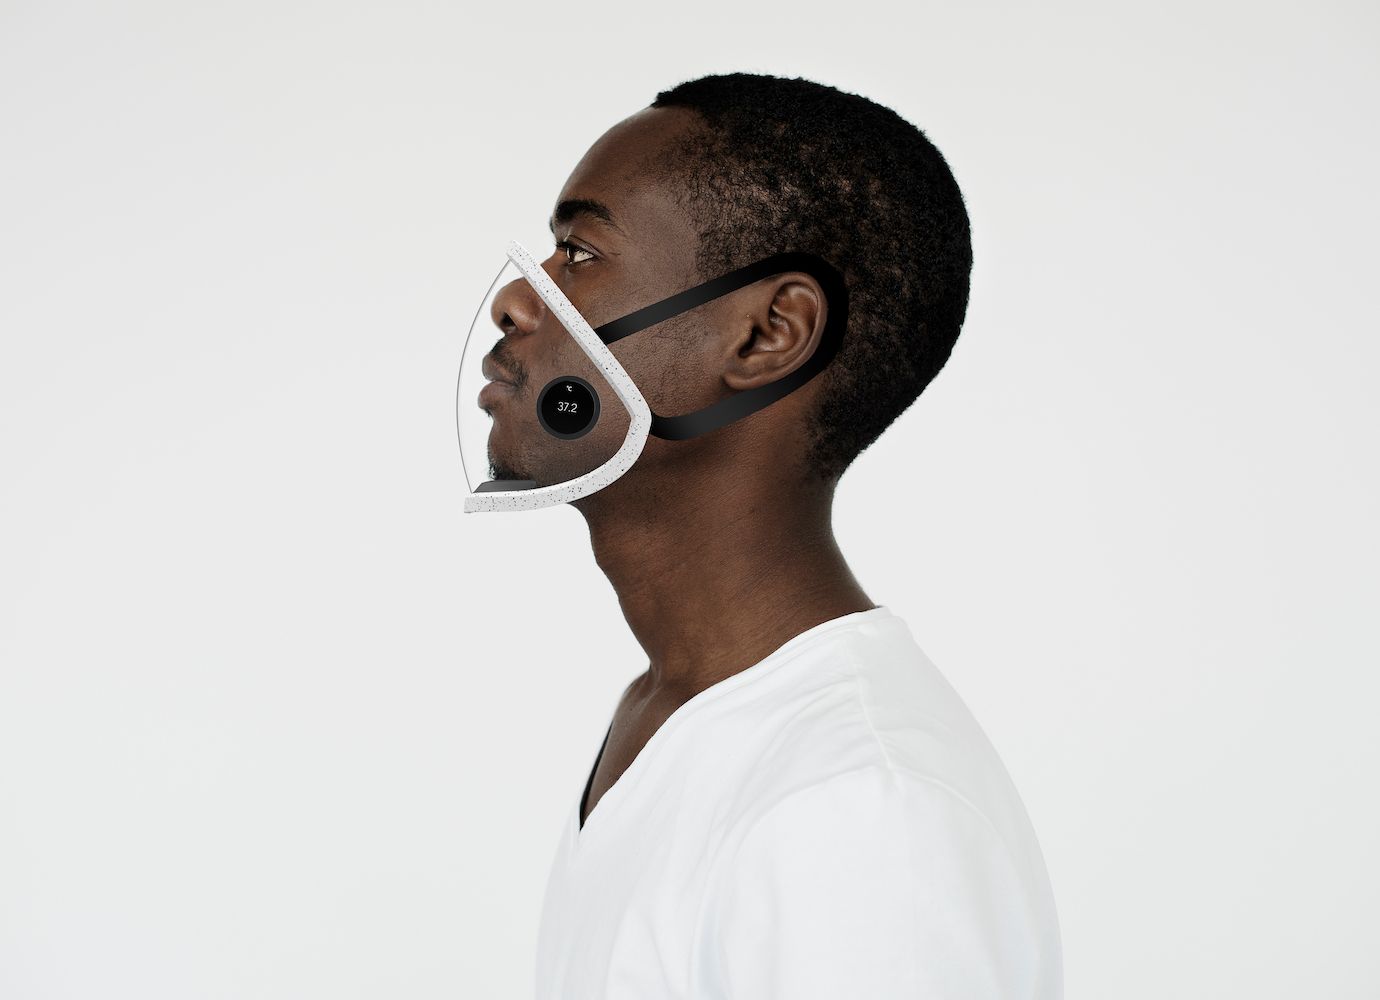 A smart face mask prototype from Romania wins MIT prize